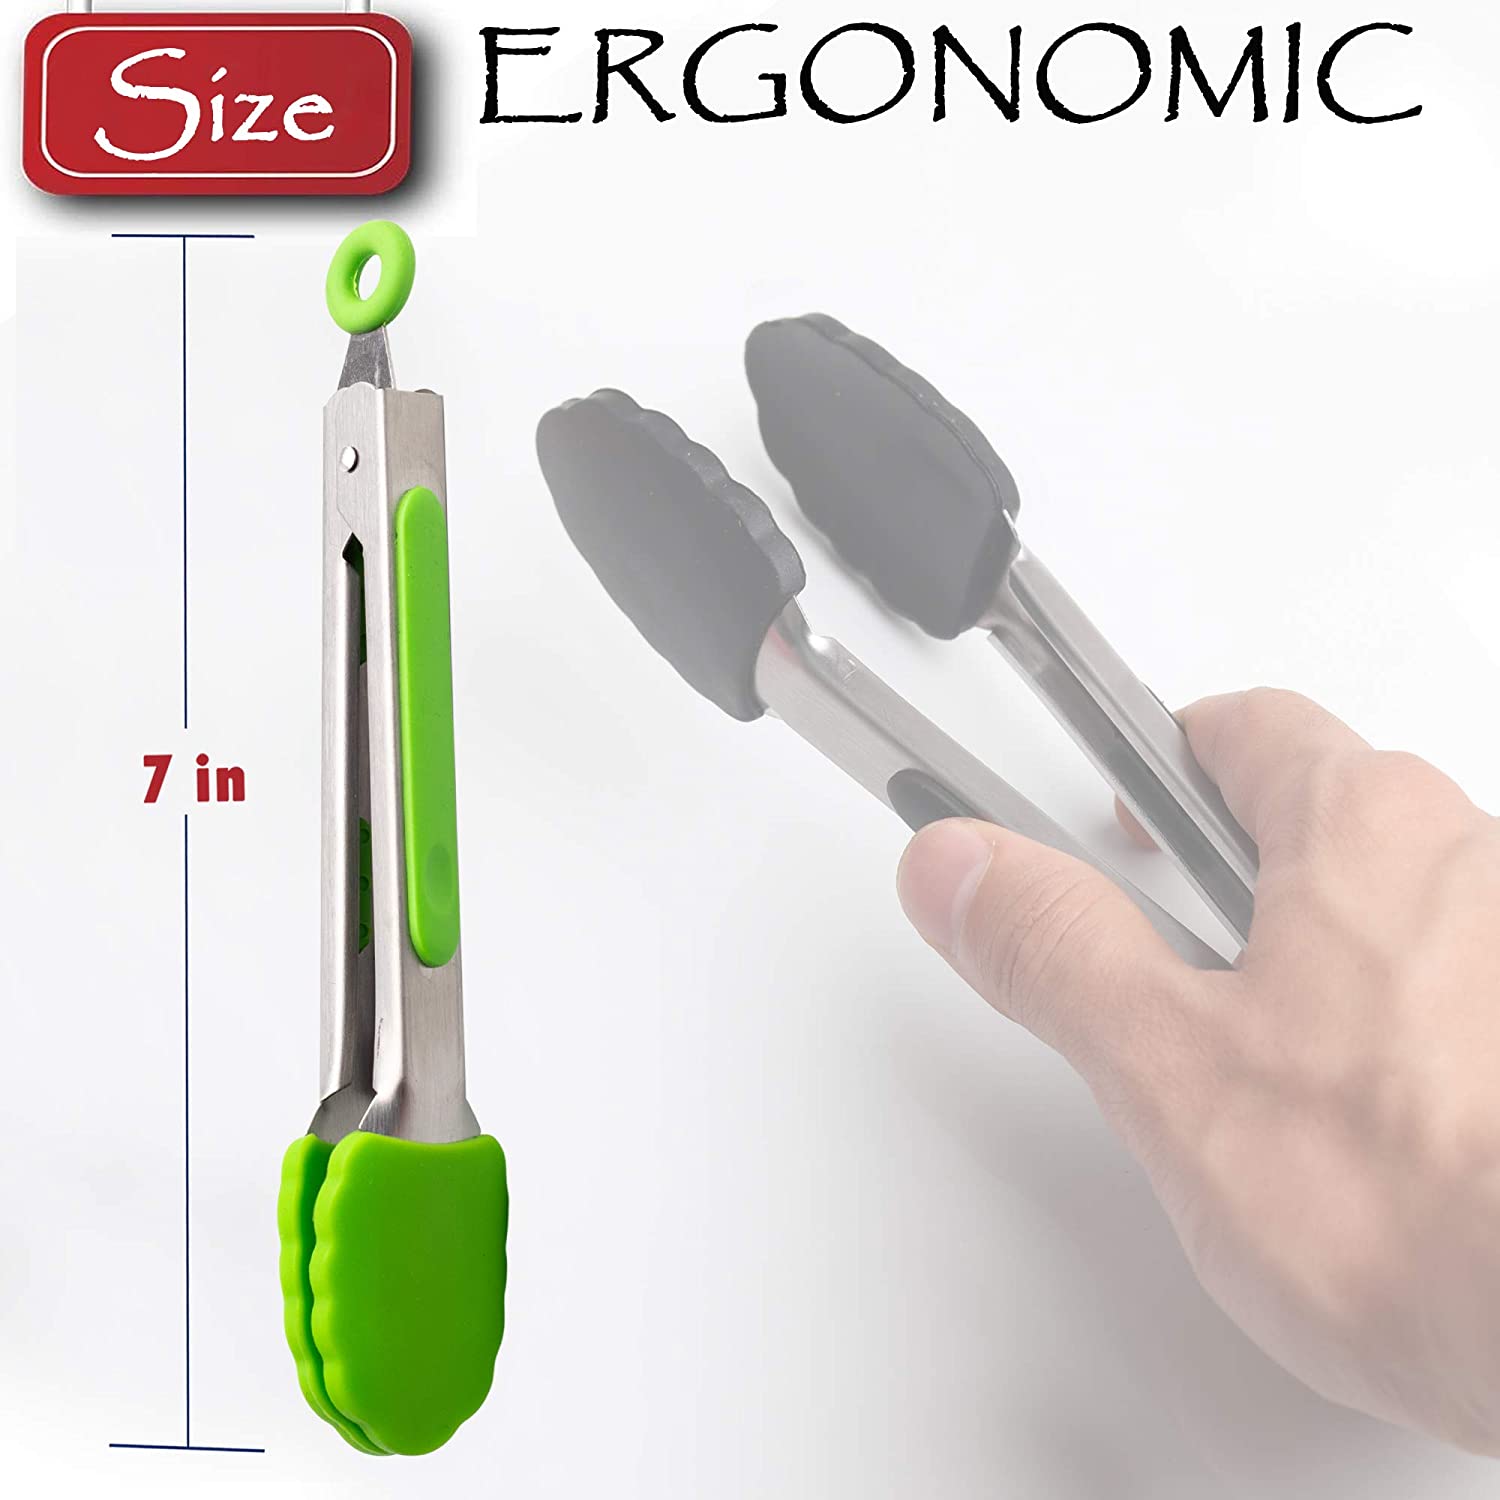 5 Pack Silicone Kitchen Cooking Tongs Set 7-Inch Mini Heavy Duty Stainless  Steel Small with Non-Stick Tips for Food,Serving,BBQ,Salad,Grilling and